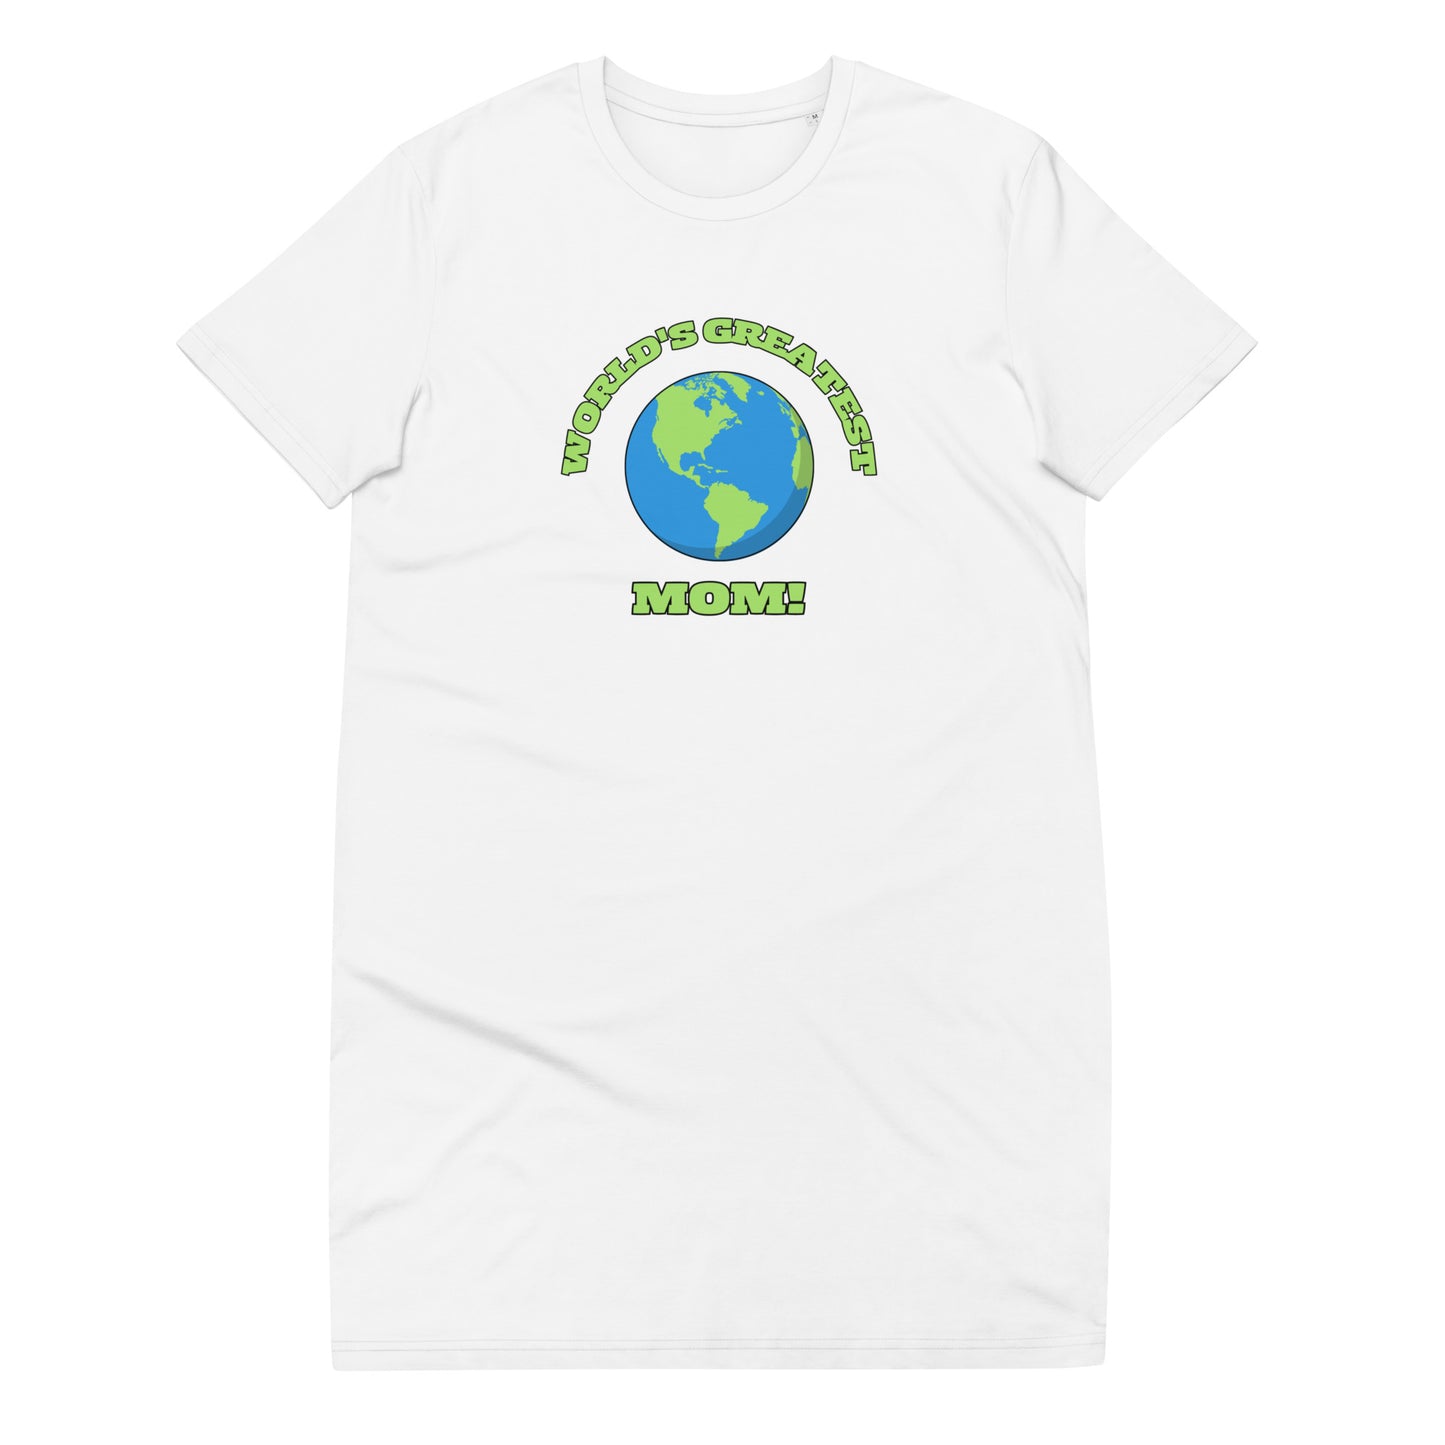 World's Greatest Mom - Organic Cotton T-Shirt Dress - Available in Several Colors